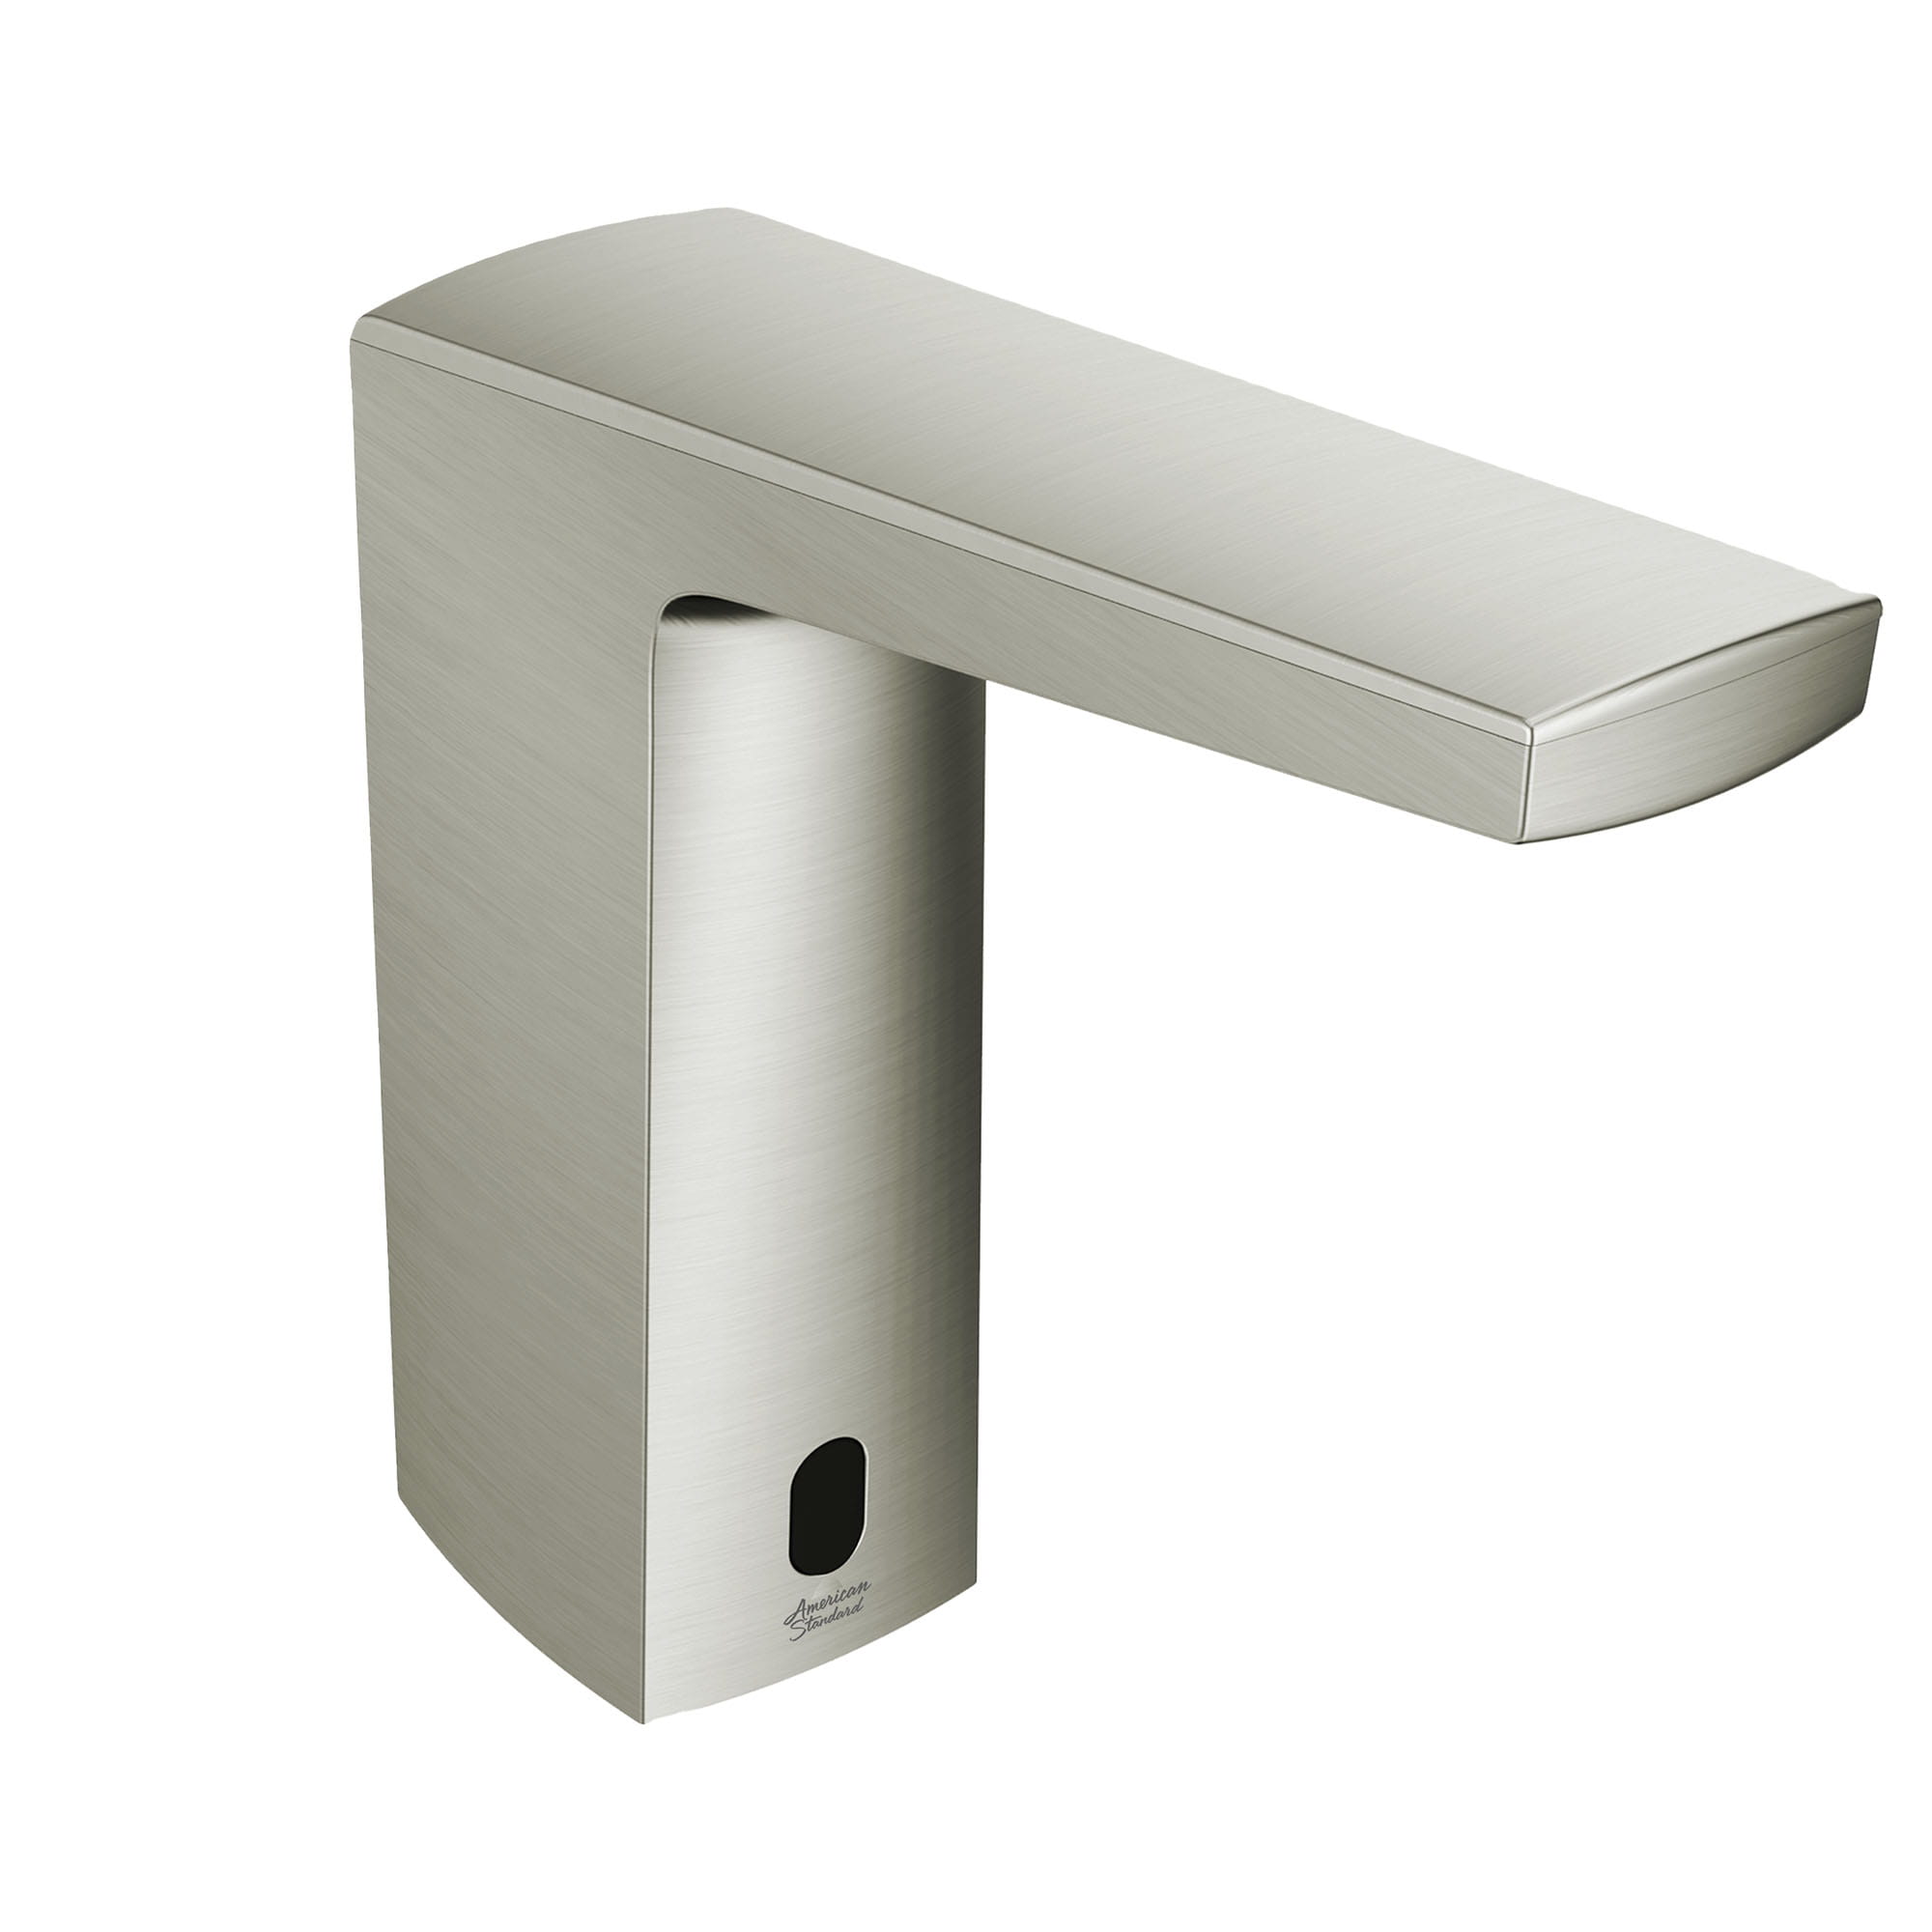 Paradigm Selectronic Touchless Faucet Battery Powered With SmarTherm Safety Shut Off  Plus  ADM 15 gpm 57 Lpm   BRUSHED NICKEL